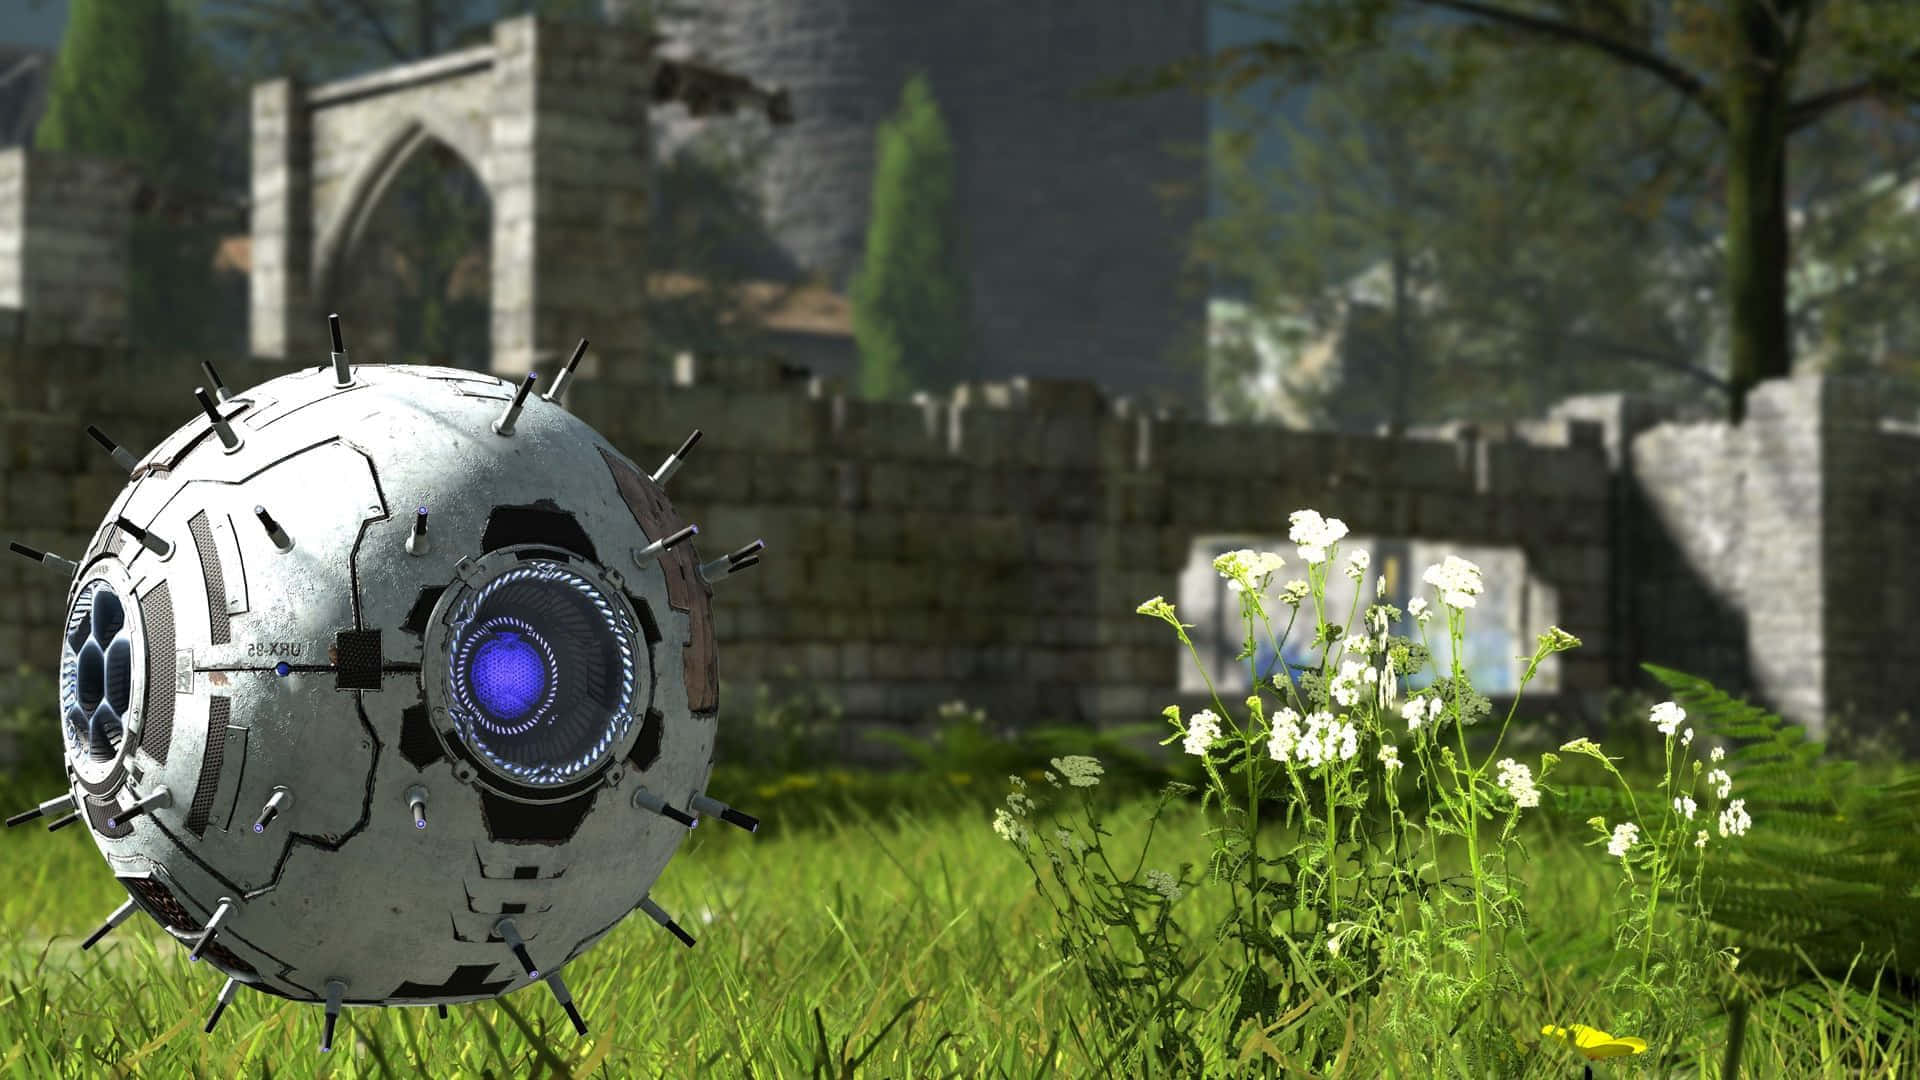 1920x1080 The Talos Principle Floating Sphere Background